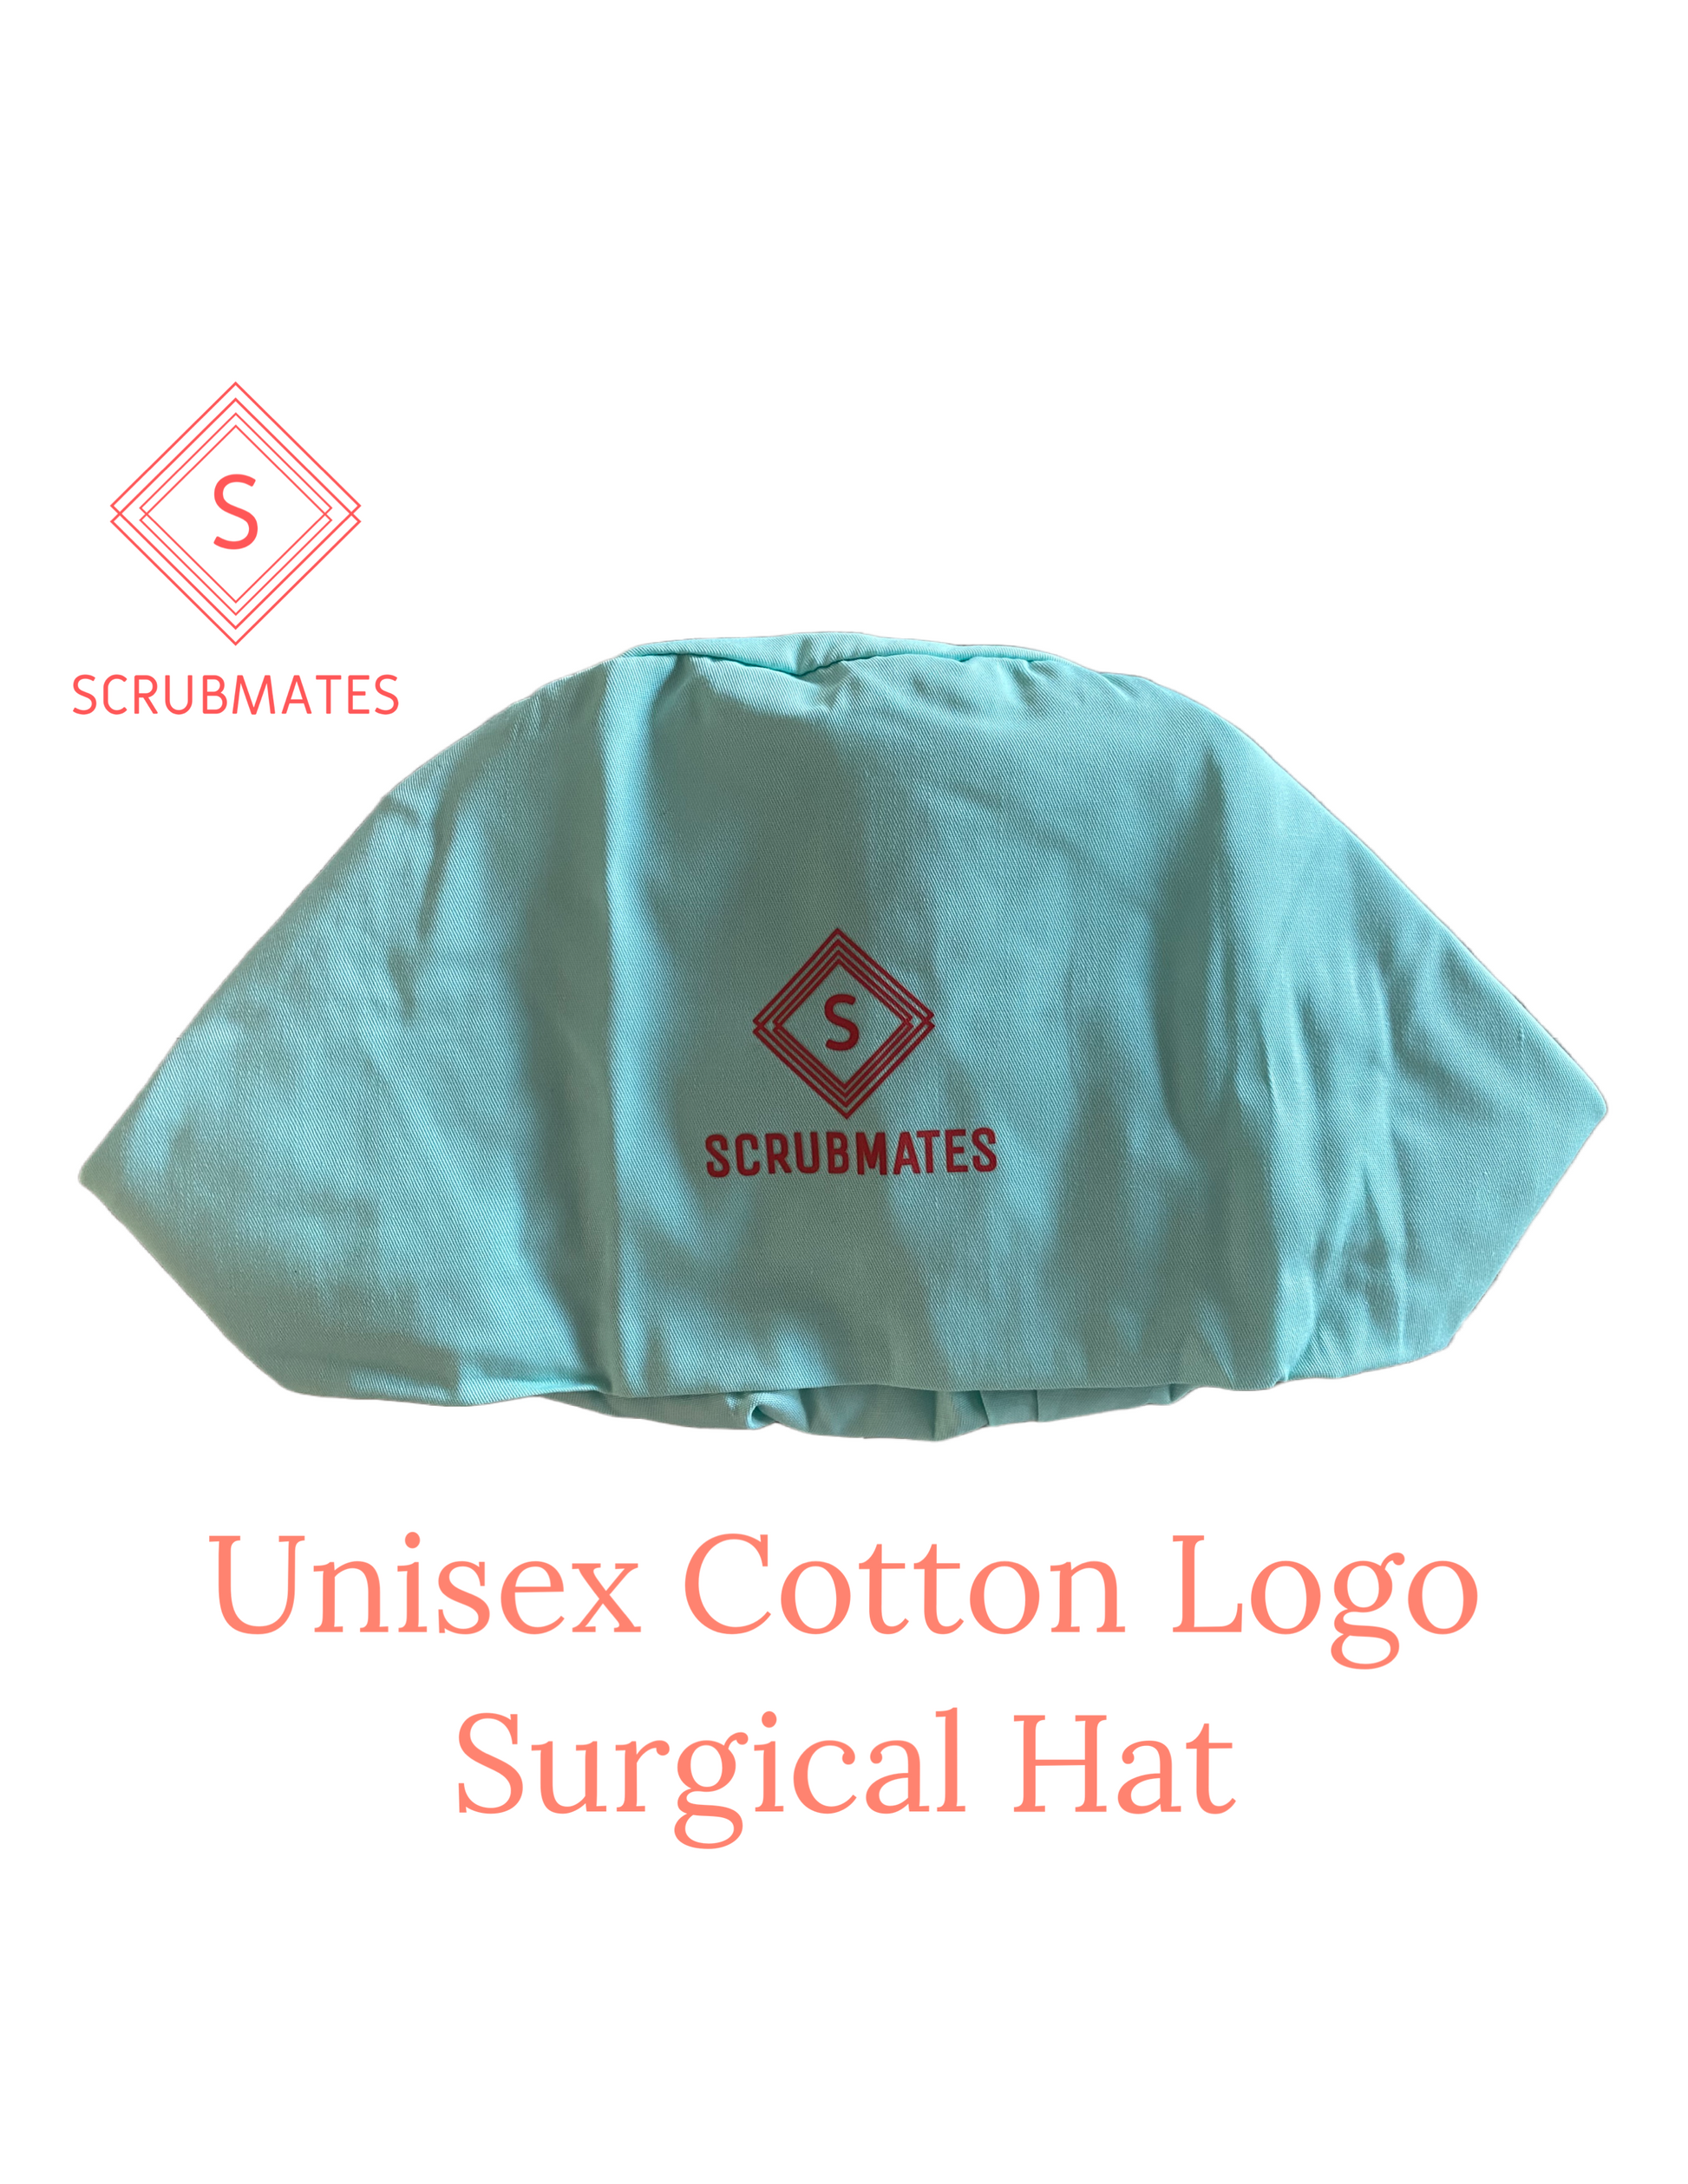 Scrubmates unisex logo scrub hat for men and women with modern, classic fit and sweat band with adjustable tieback. Made to protect your hair as well as provide all day comfort sea green